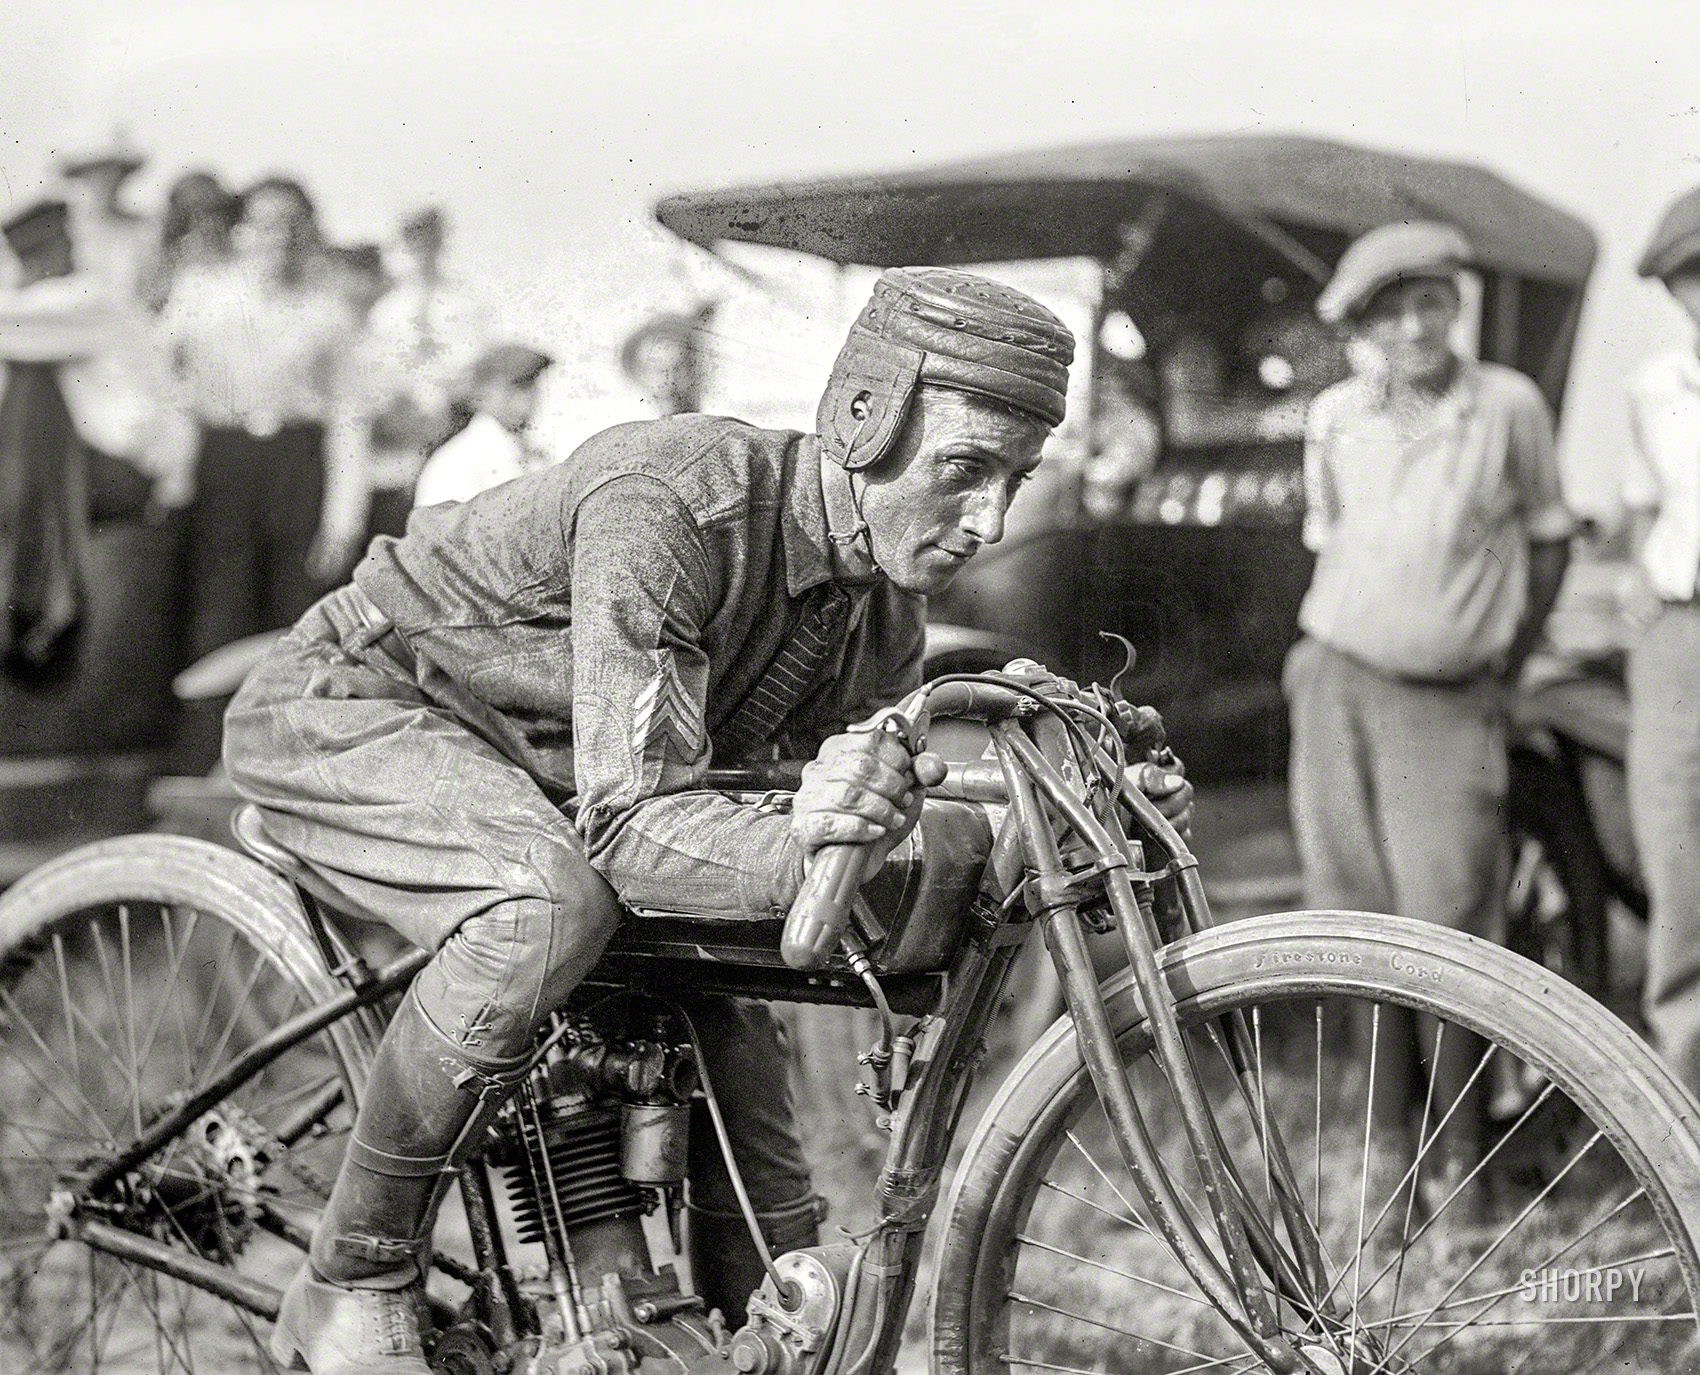 Washington, D.C. "Billy Denham, 9/5/22." Competitive cyclist both motor- and bi-. National Photo Company Collection glass negative. View full size.